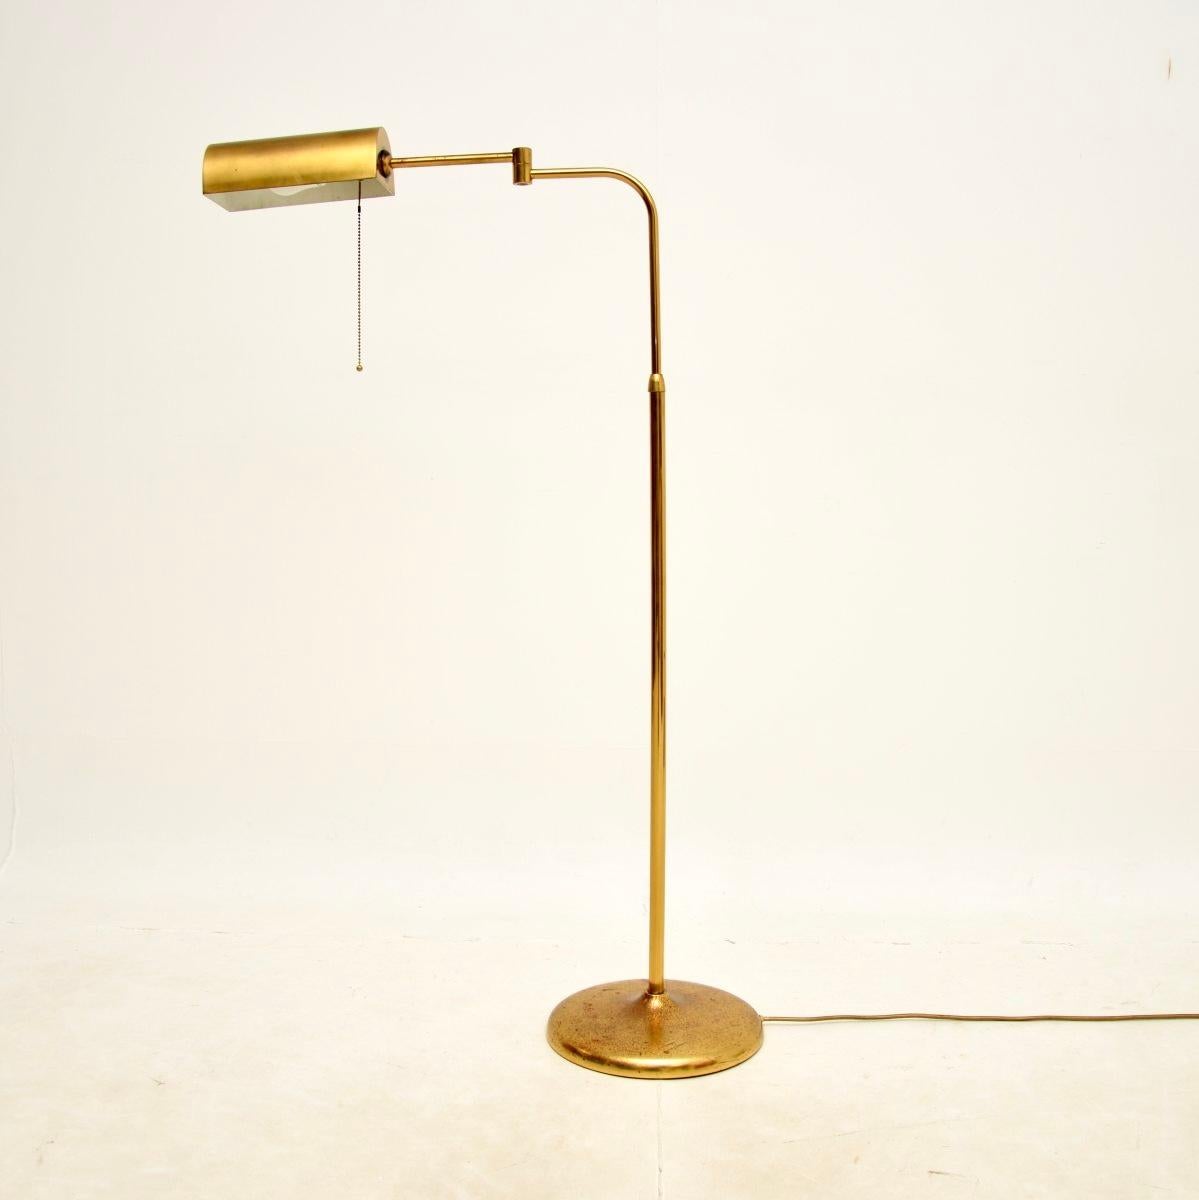 A stylish and very well made vintage Italian brass floor lamp. This was made in Italy, it dates from the 1970’s.

The quality is fantastic, this is solid brass and has an adjustable lamp shade that can swivel and tilt. It would work well in a